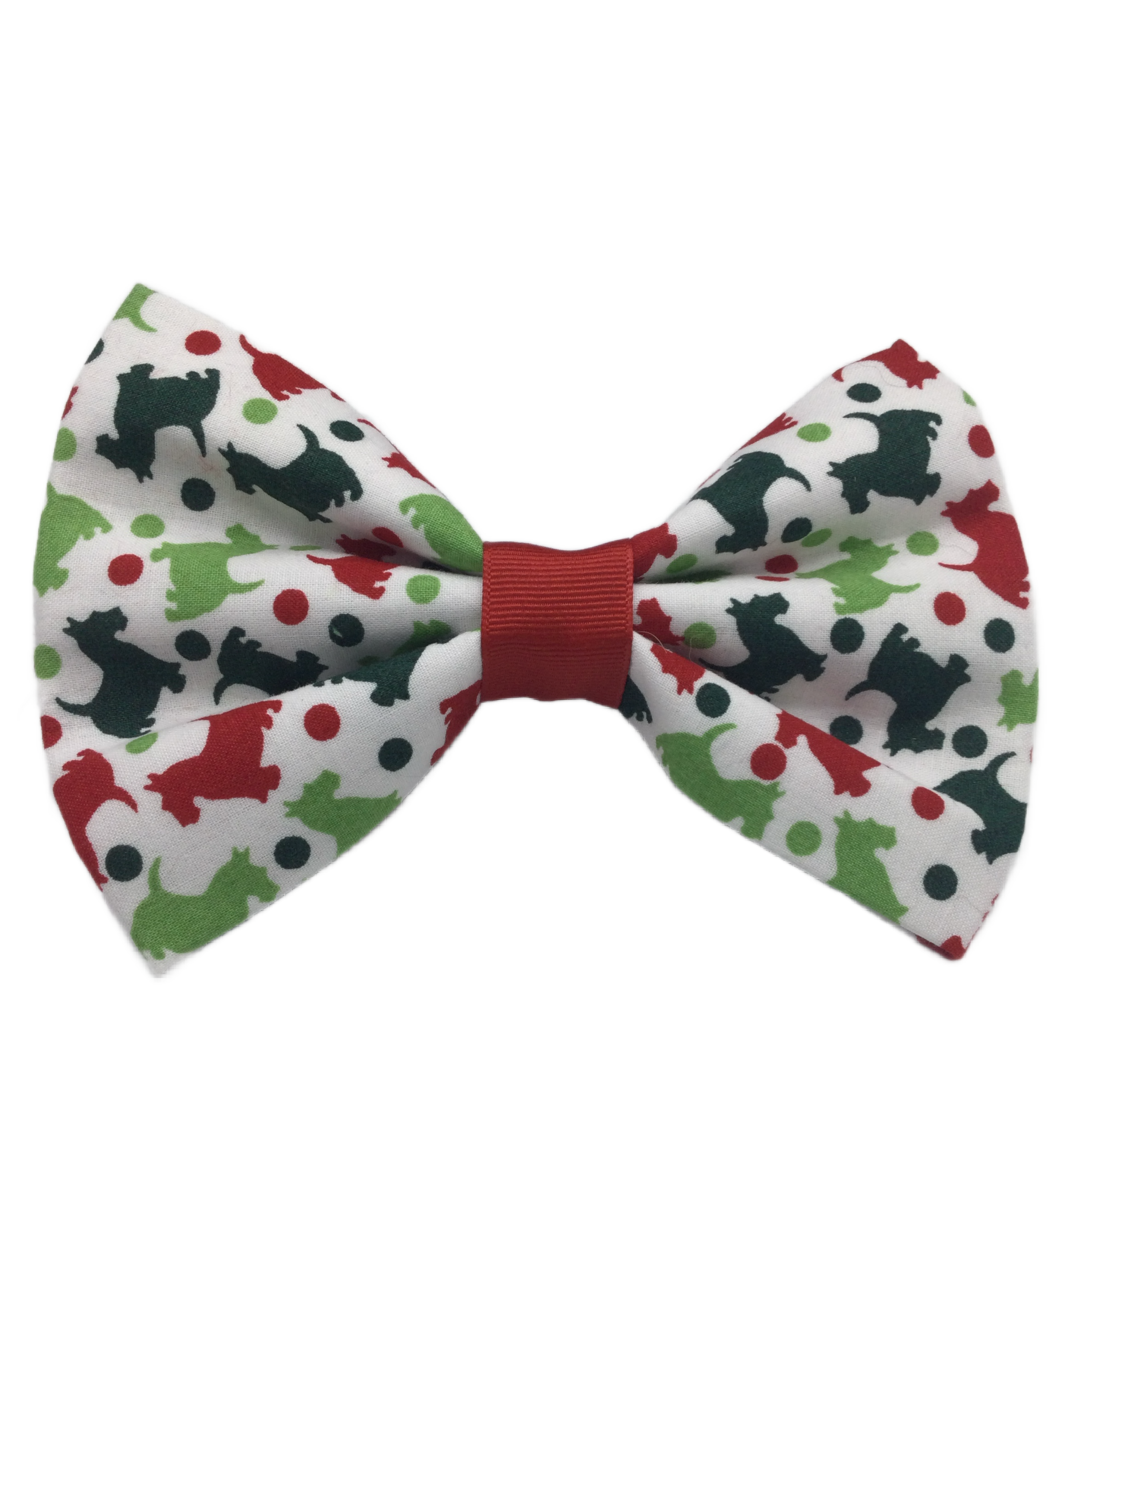 Christmas Bow Tie for Dogs